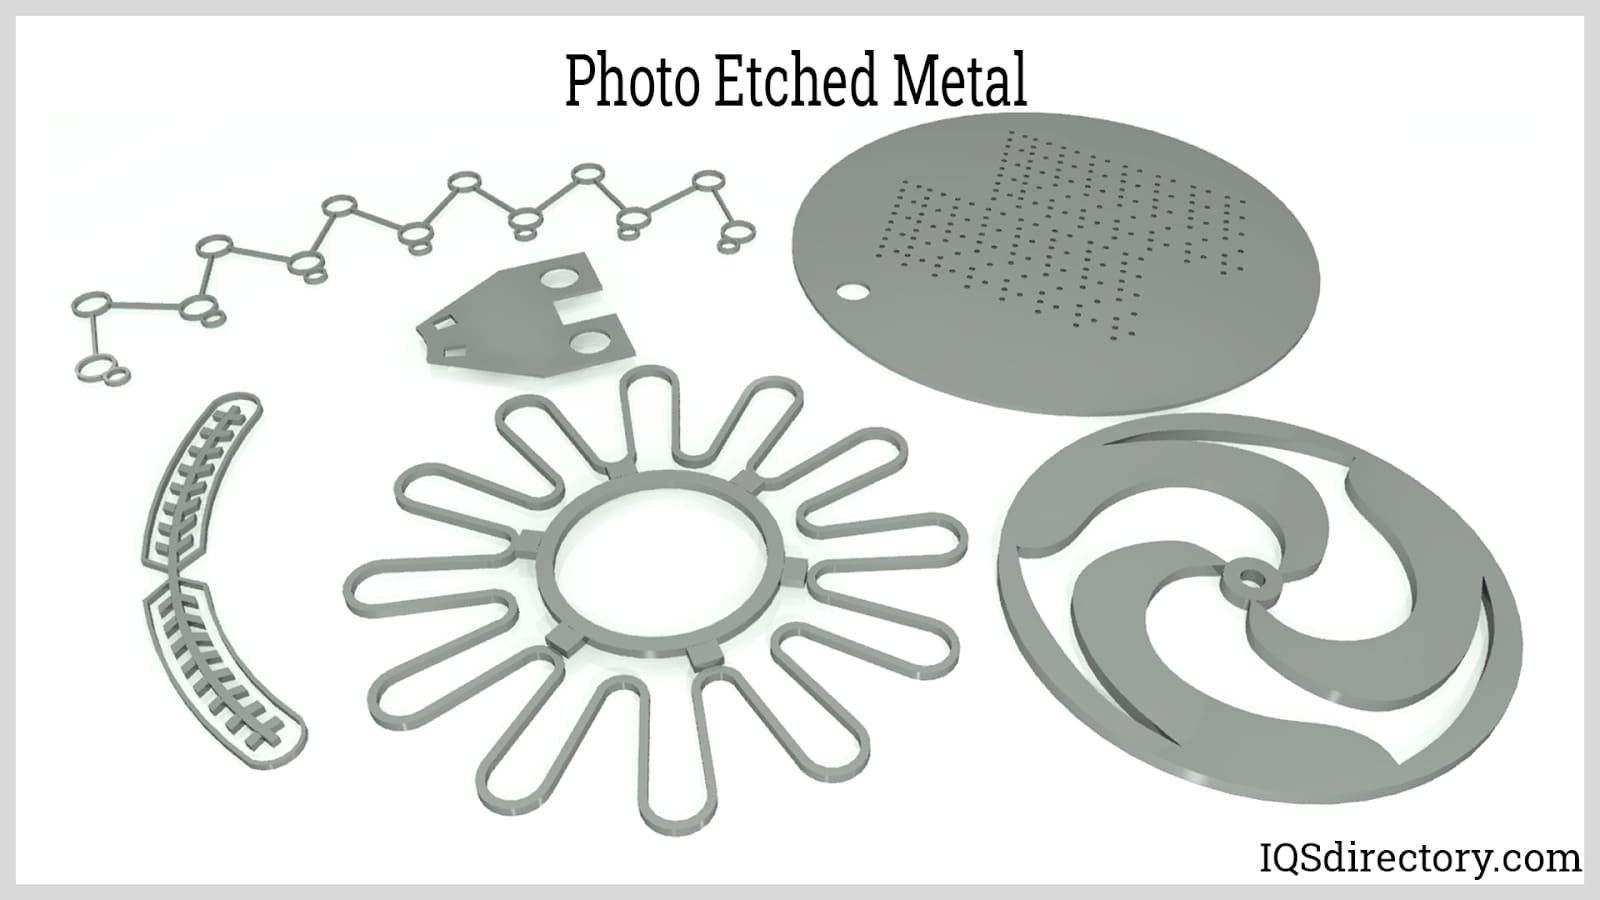 Photo Etched Metal